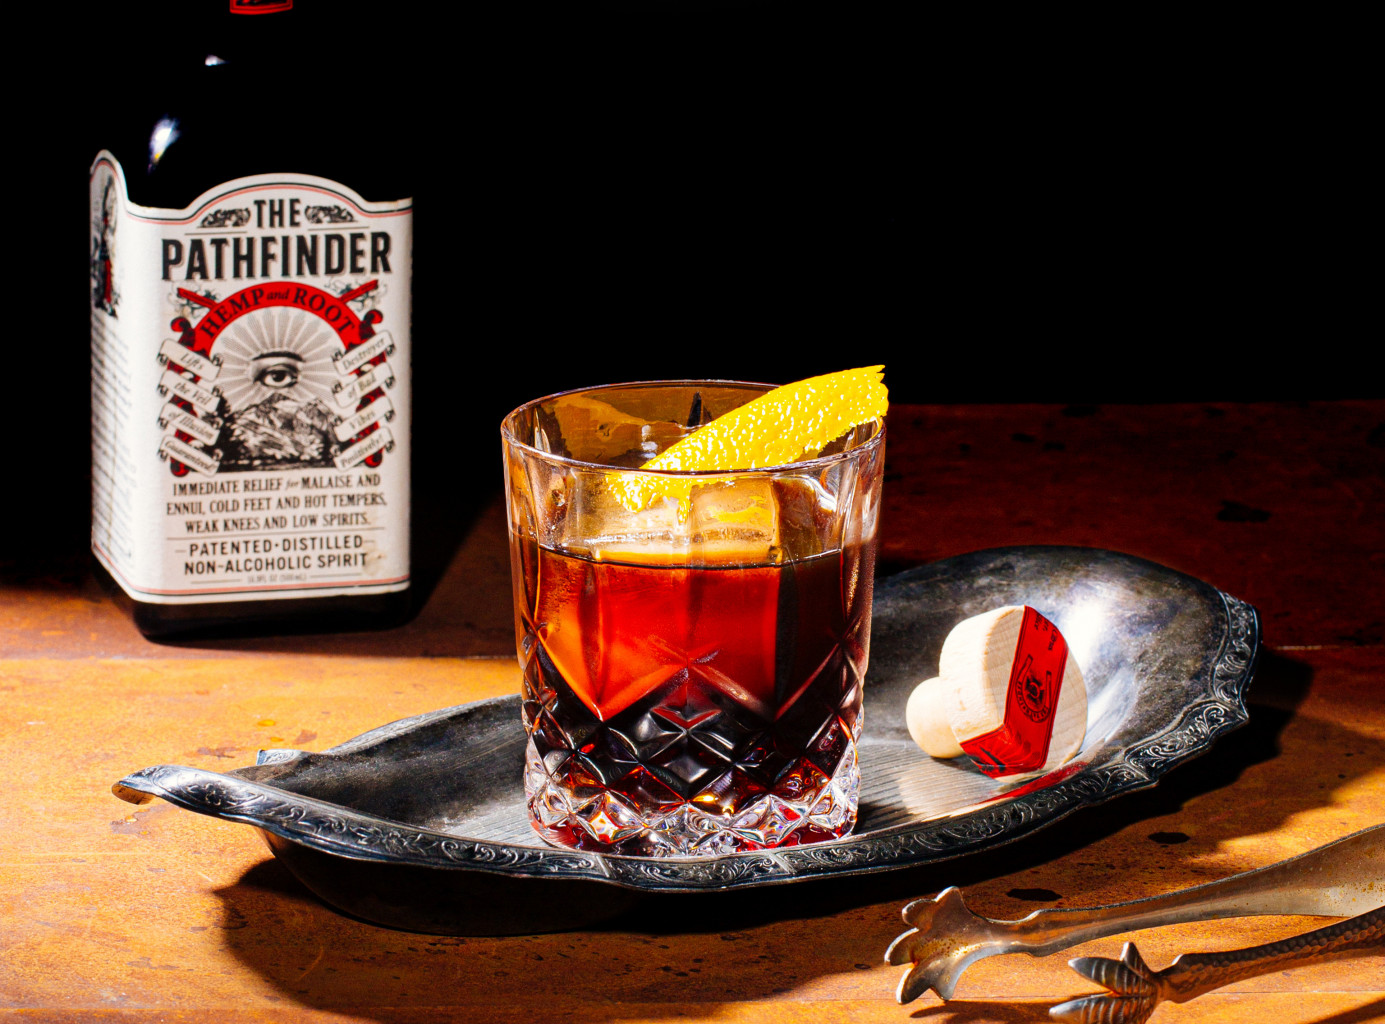 A dark, iced beverage with orange garnish sits on a silver tray. A bottle of Pathfinder is in the background.